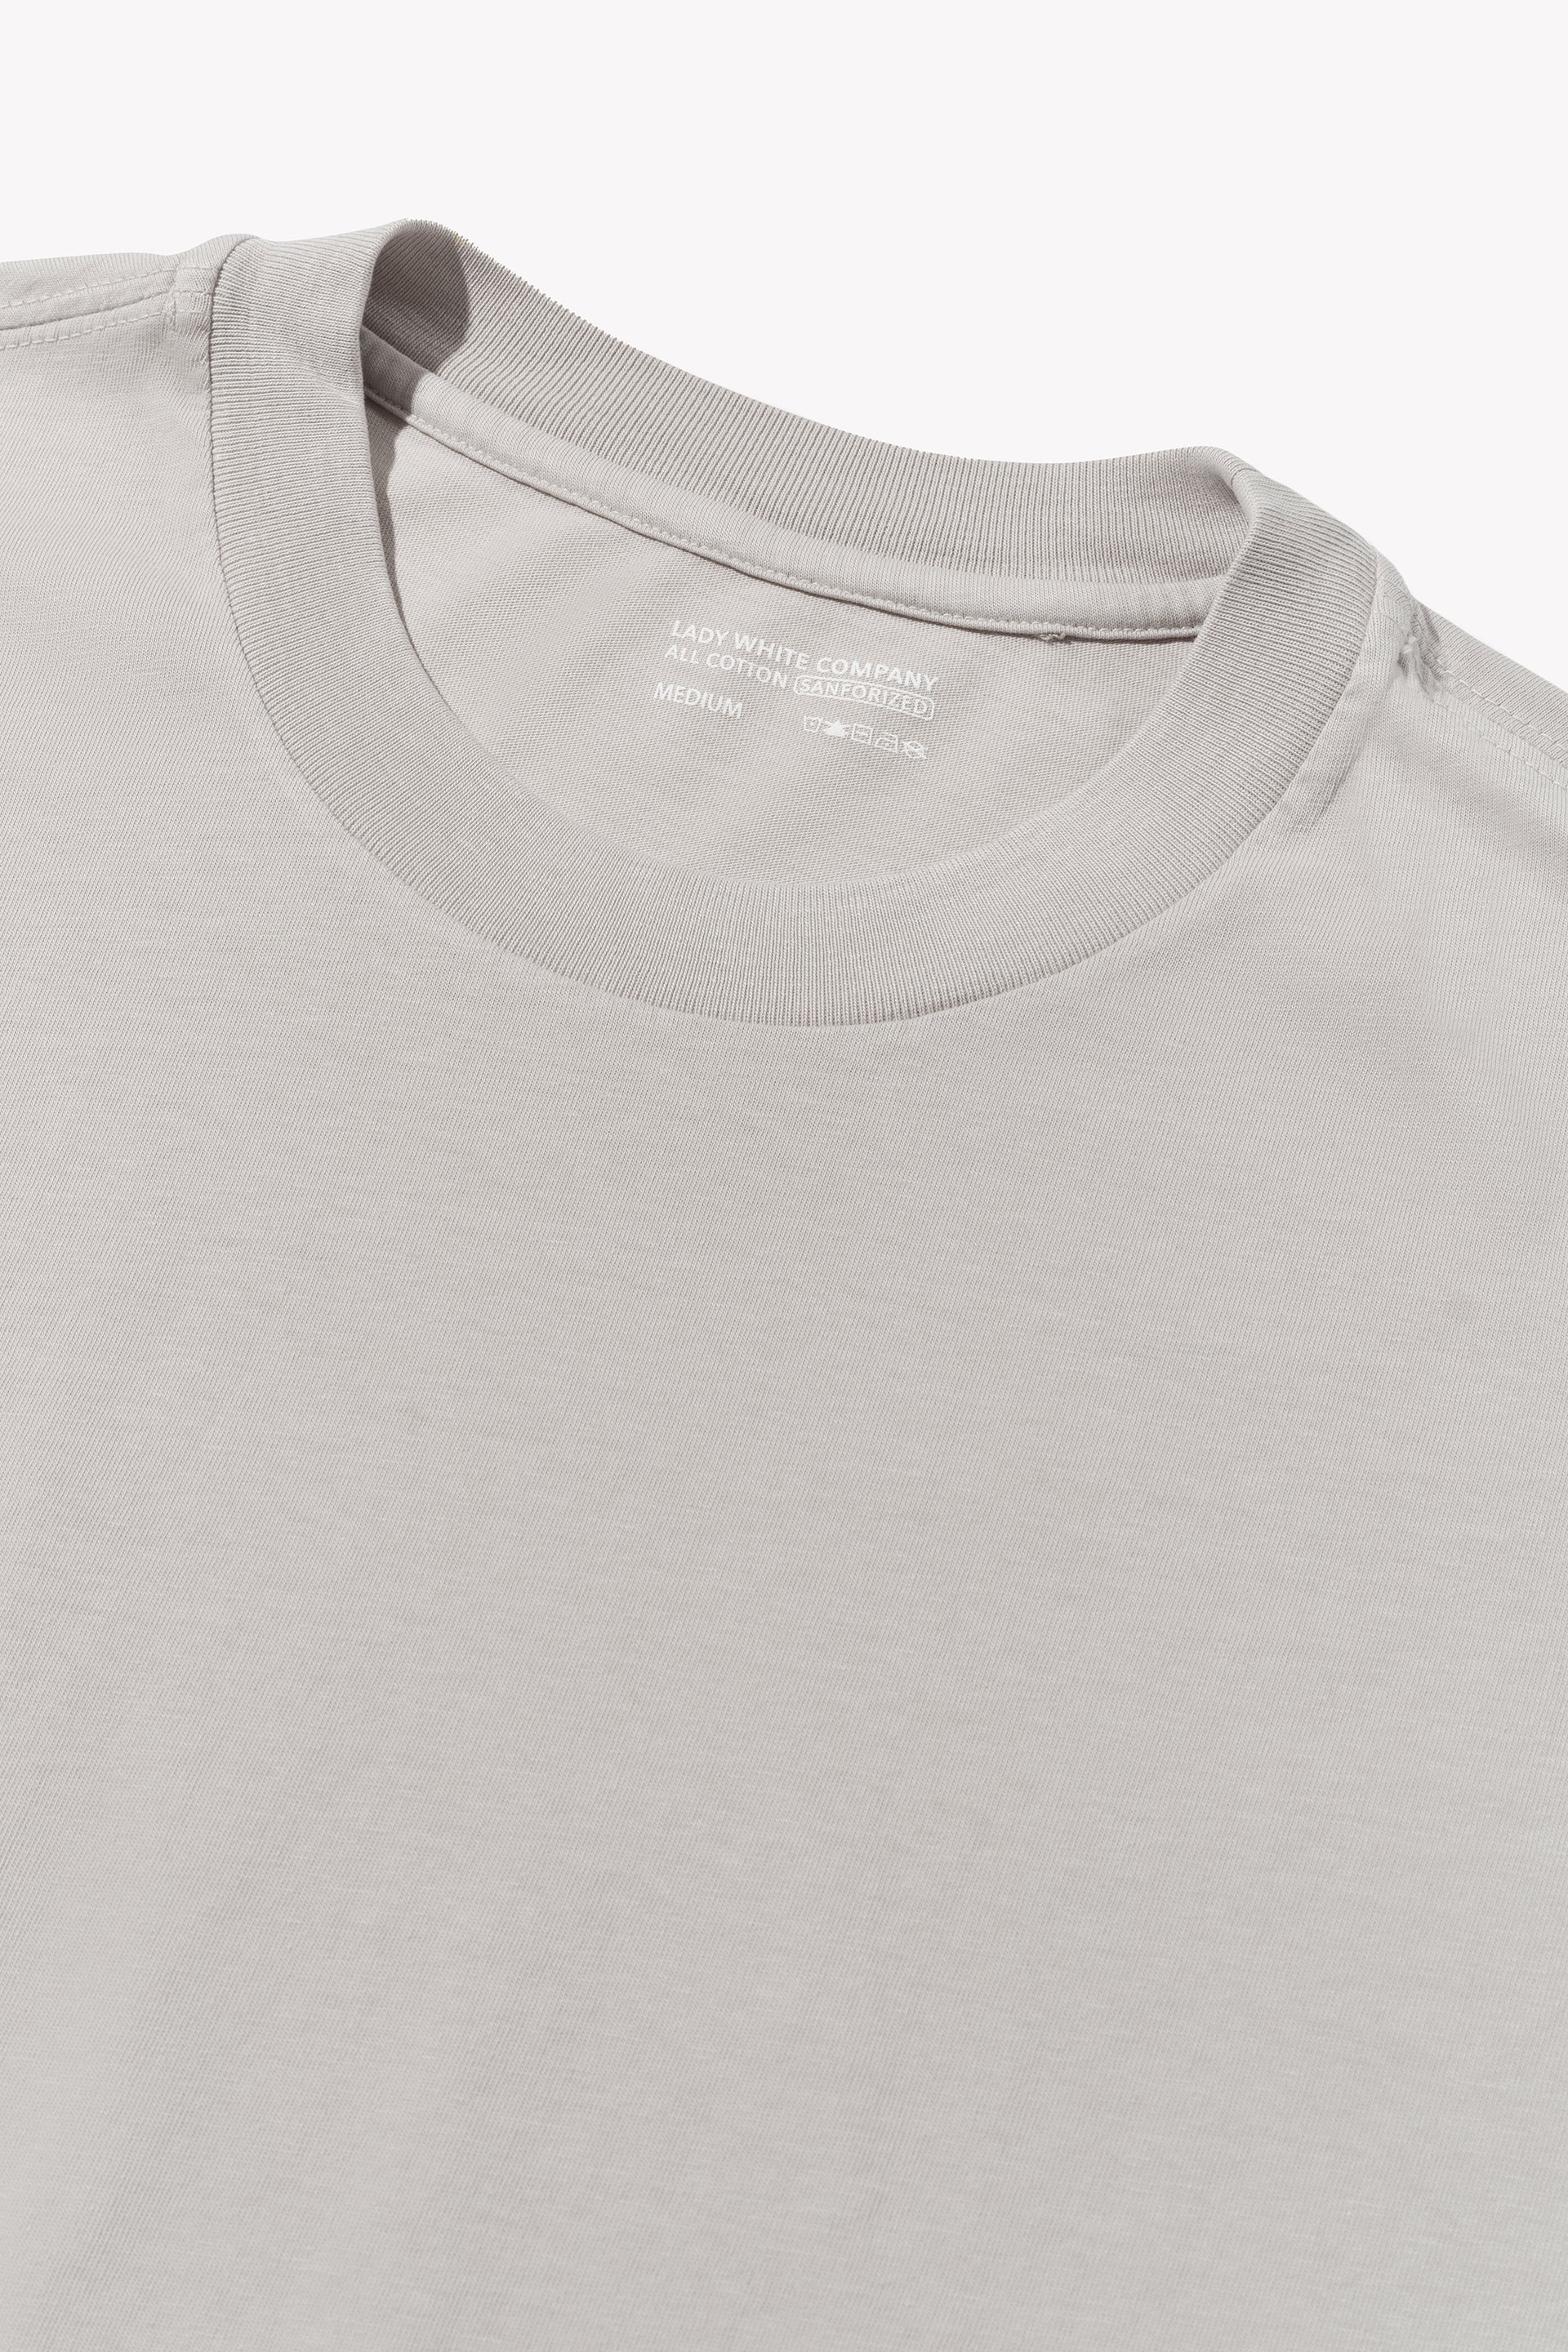 ATHENS T-SHIRT - SWISS NATURAL – LADY WHITE CO.